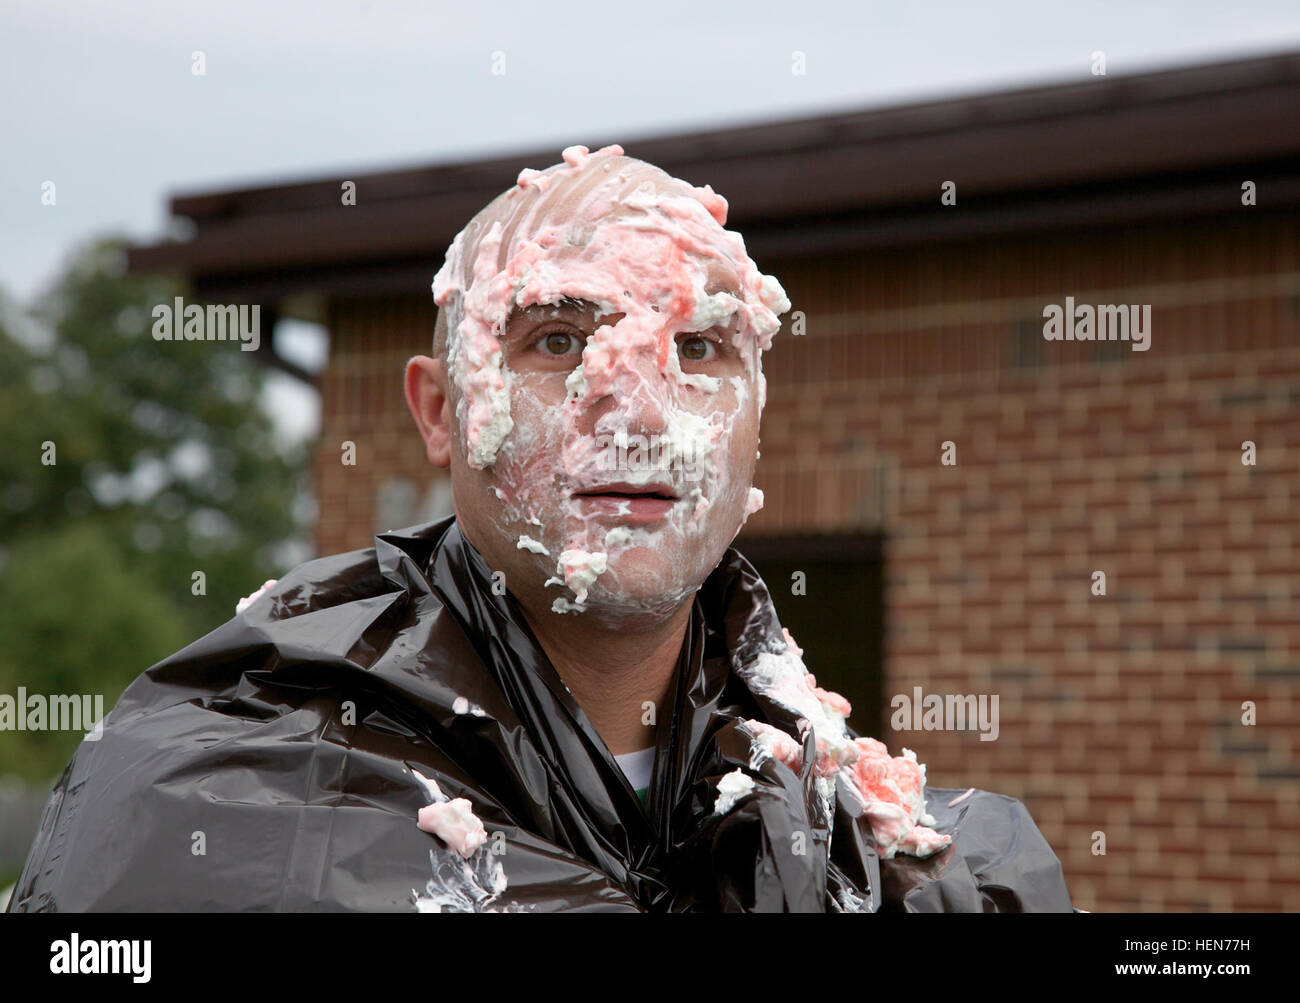 U.S. Army Sgt. Richard Jones poses with pie on his face during a Family Readiness Group event at the 55th Signal Company, Fort George G. Meade, Md., Oct. 17, 2013. The FRG event was conducted to raise money, while giving soldiers the opportunity to bid on a pie to hit a senior leader with. (U.S. Army photo by Sgt. Evangelia Grigiss/Released) FRG Pie in the Face Fundraiser 131017-A-LQ527-565 Stock Photo